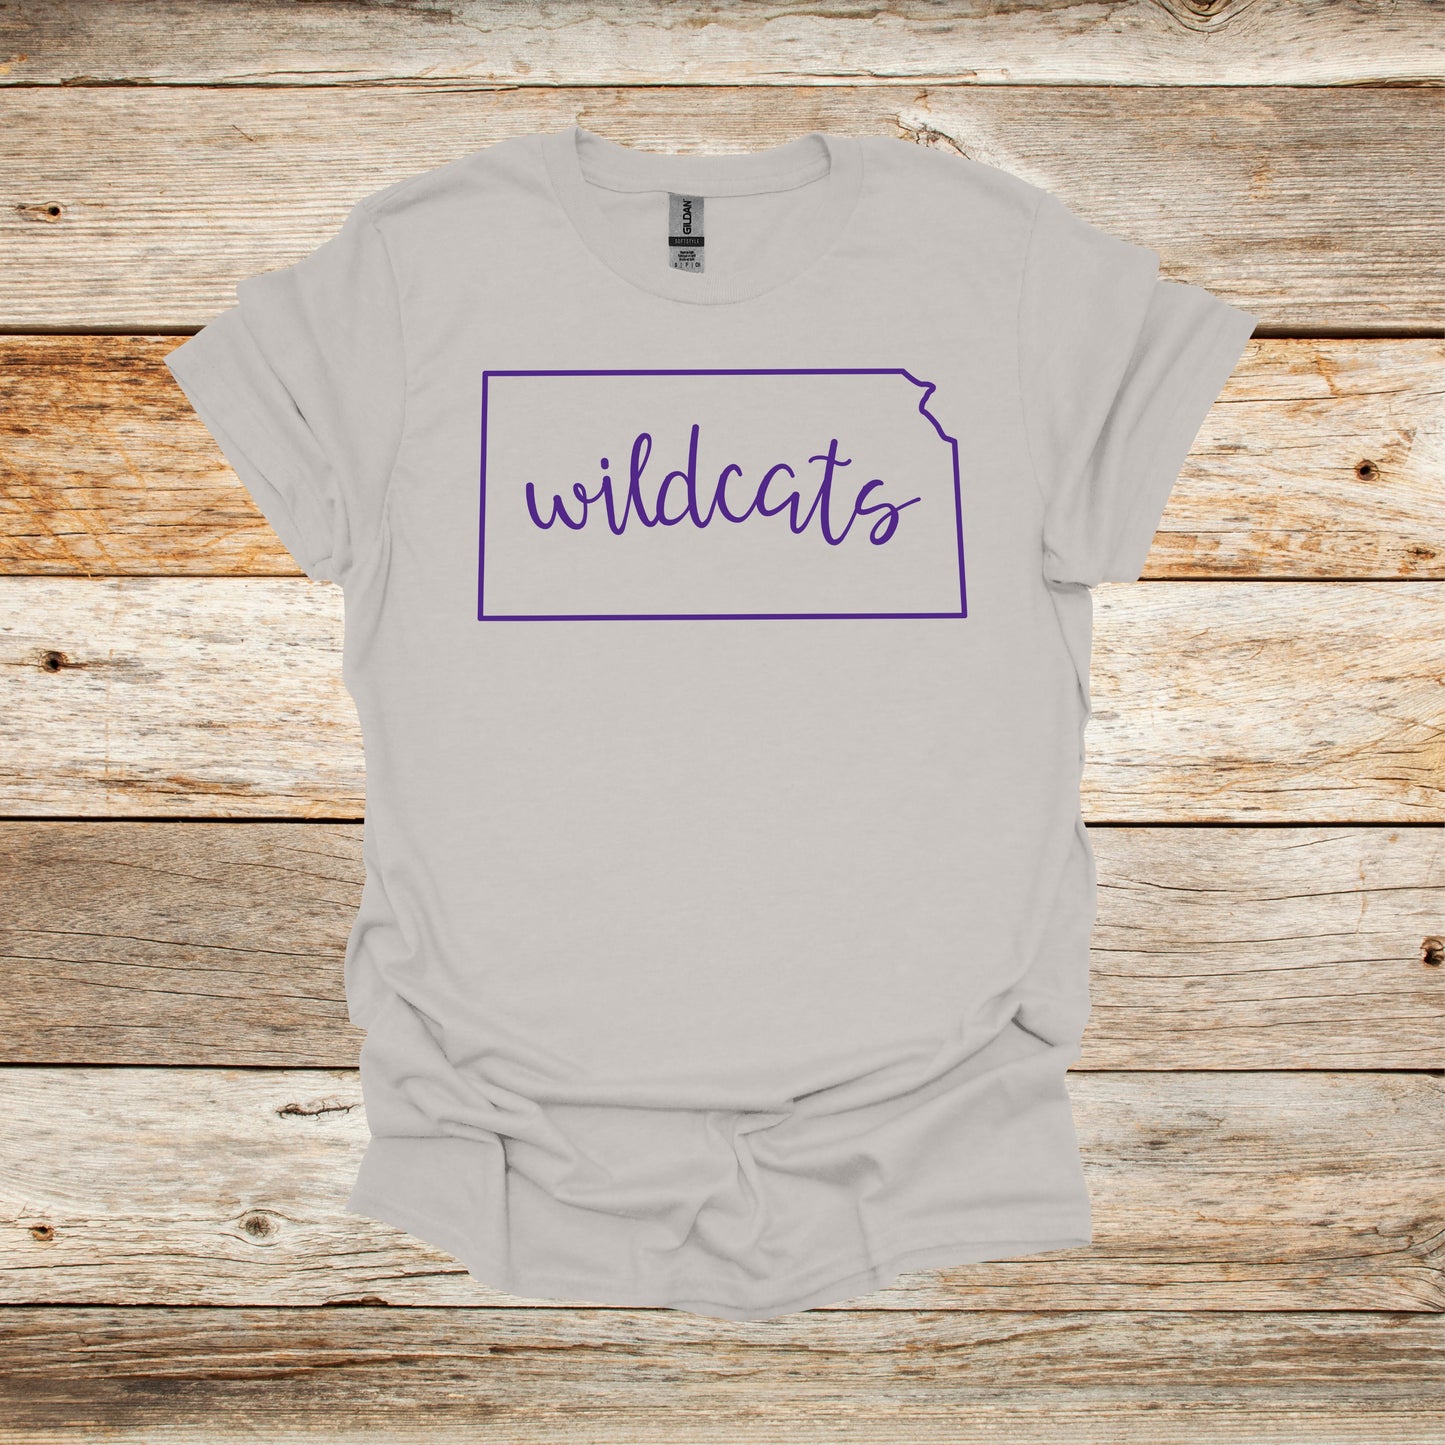 College T Shirt - Kansas State Wildcats - State Outline - Adult and Children's Tee Shirts T-Shirts Graphic Avenue Ice Grey Adult Small 